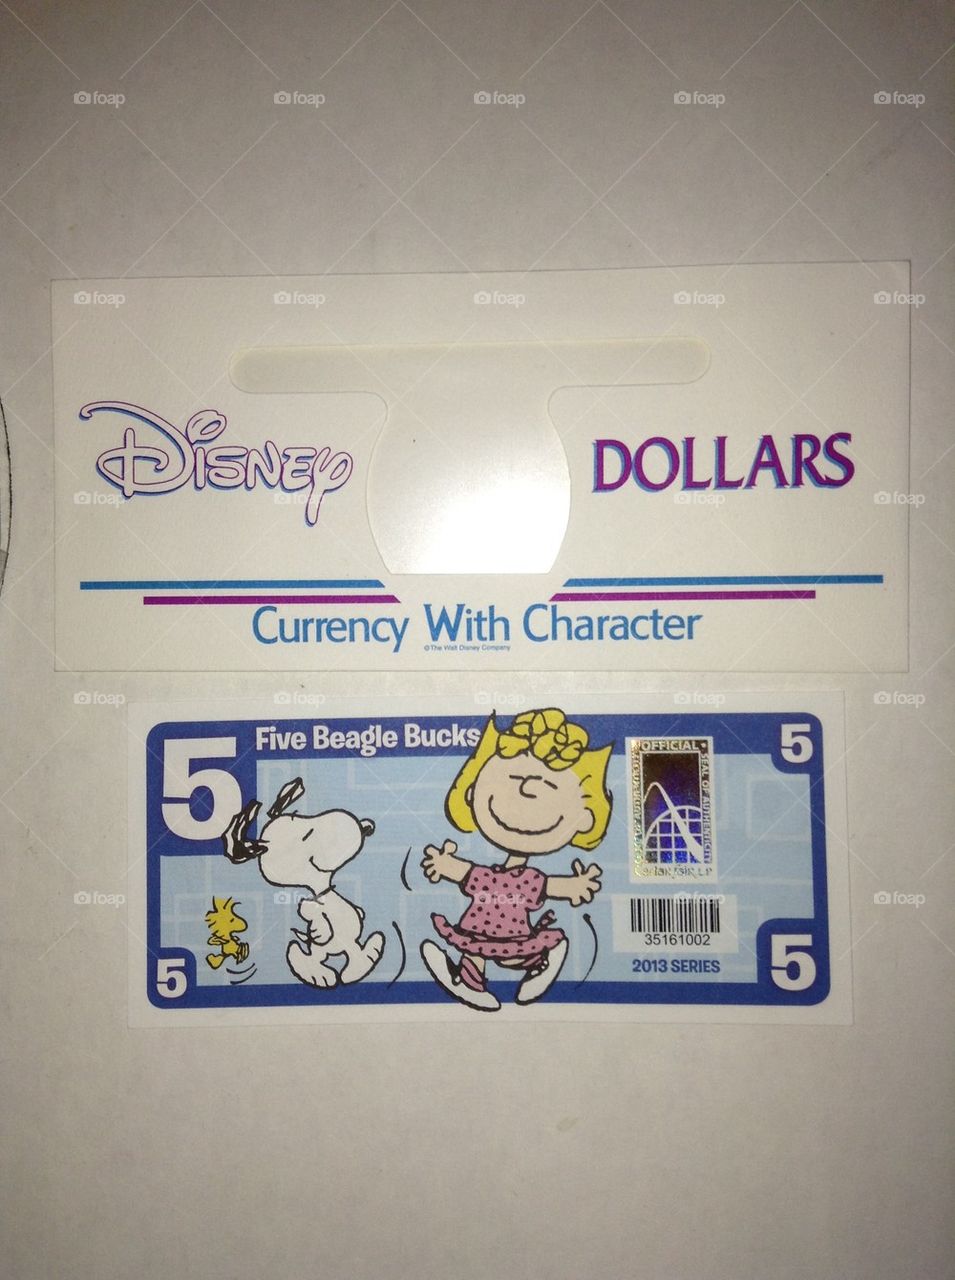 OFFICIAL CURRENCY OF KNOTTS BERRY FARM "BEAGLE BUCKS" With DISNEYLAND DISNEY DOLLAR ENVELOPE